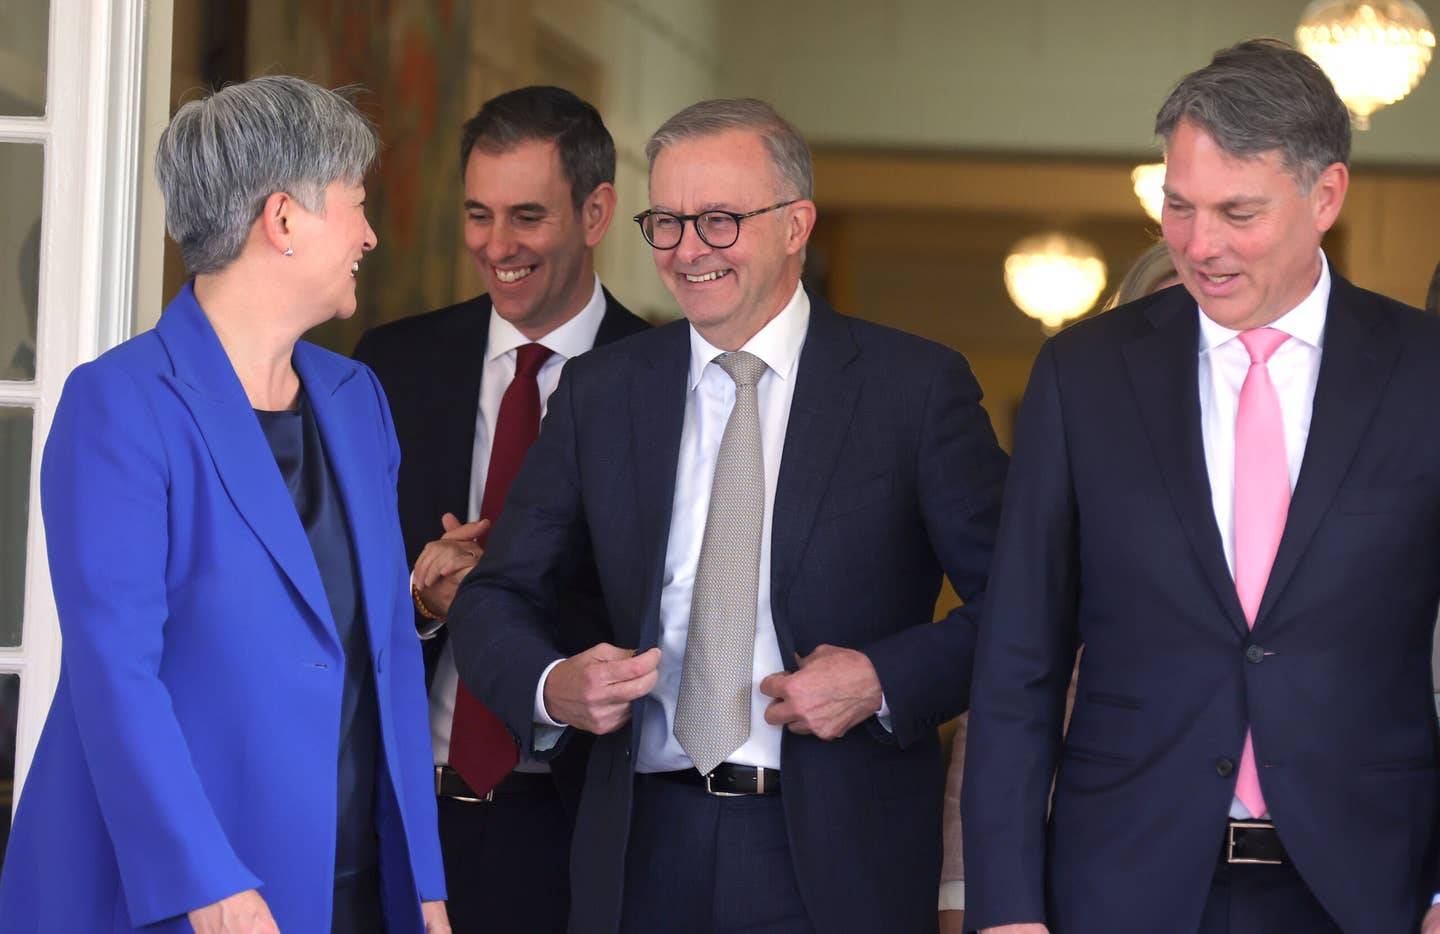 Foreign Minister Penny Wong, Treasurer Jim Chalmers, Prime Minister Anthony Albanese, and Deputy Prime Minister Richard Marles after being sworn in on May 23, in Canberra, Australia. <em>Photo by David Gray/Getty Images</em>